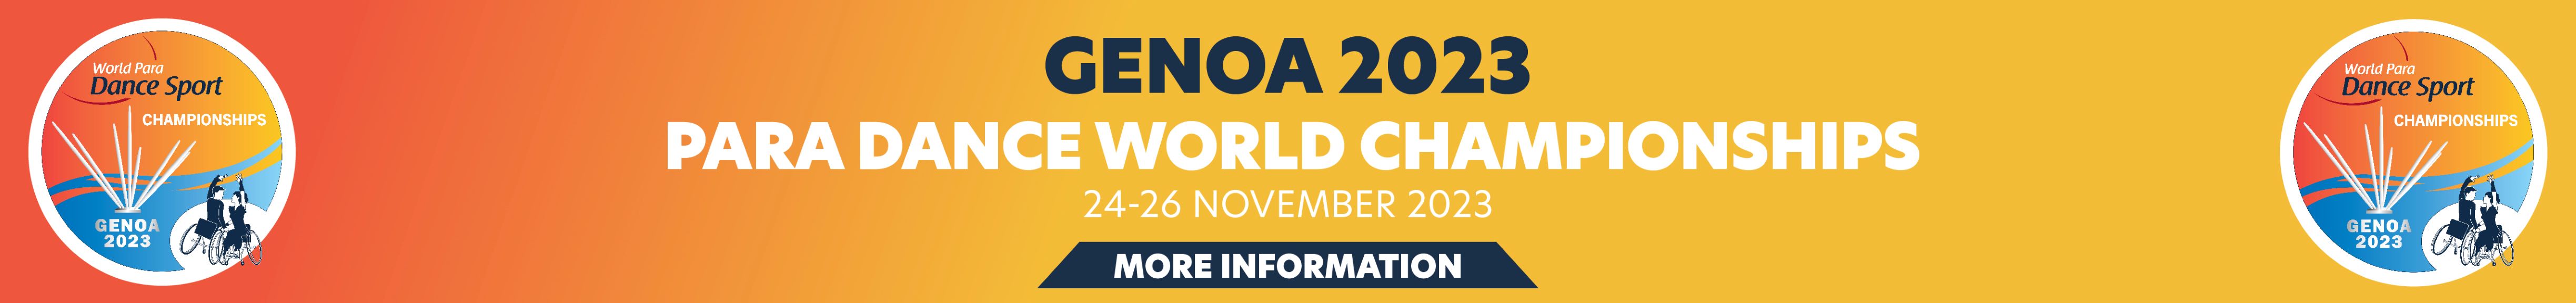 The banner of the Genoa 2023 Para Dance Sport World Championships